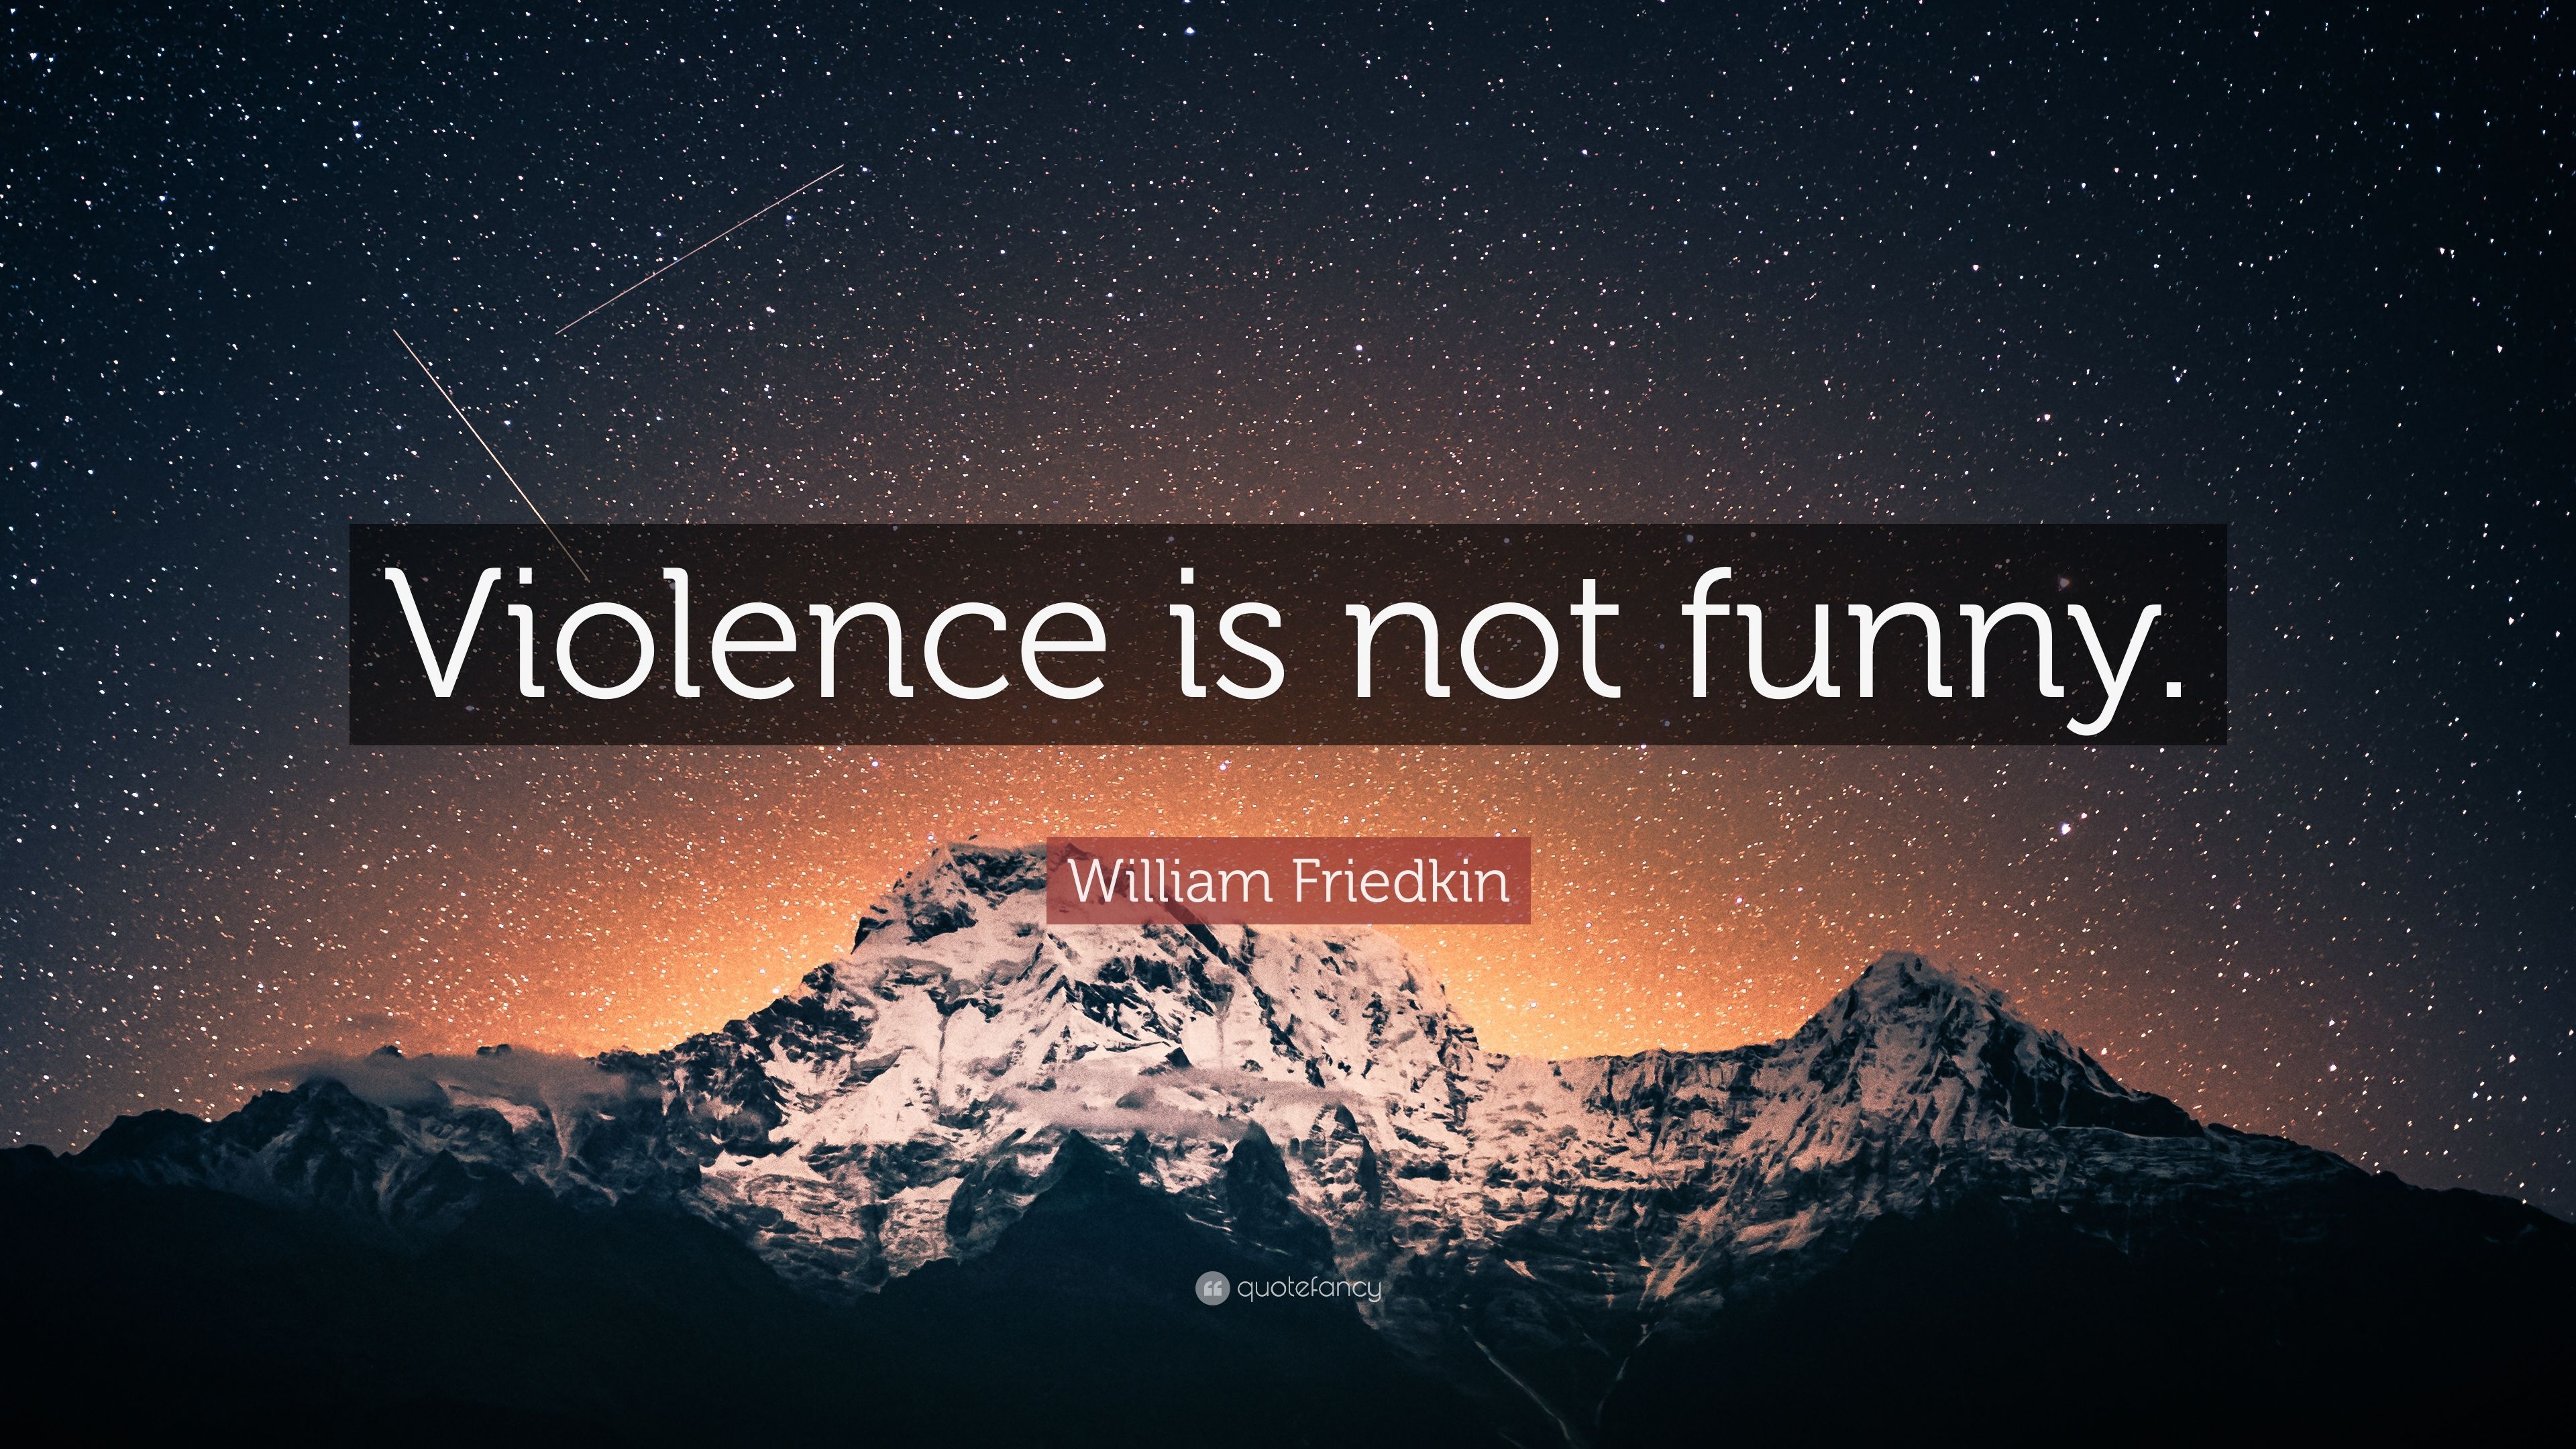 William Friedkin Quote: “Violence is not funny.” (7 wallpaper)